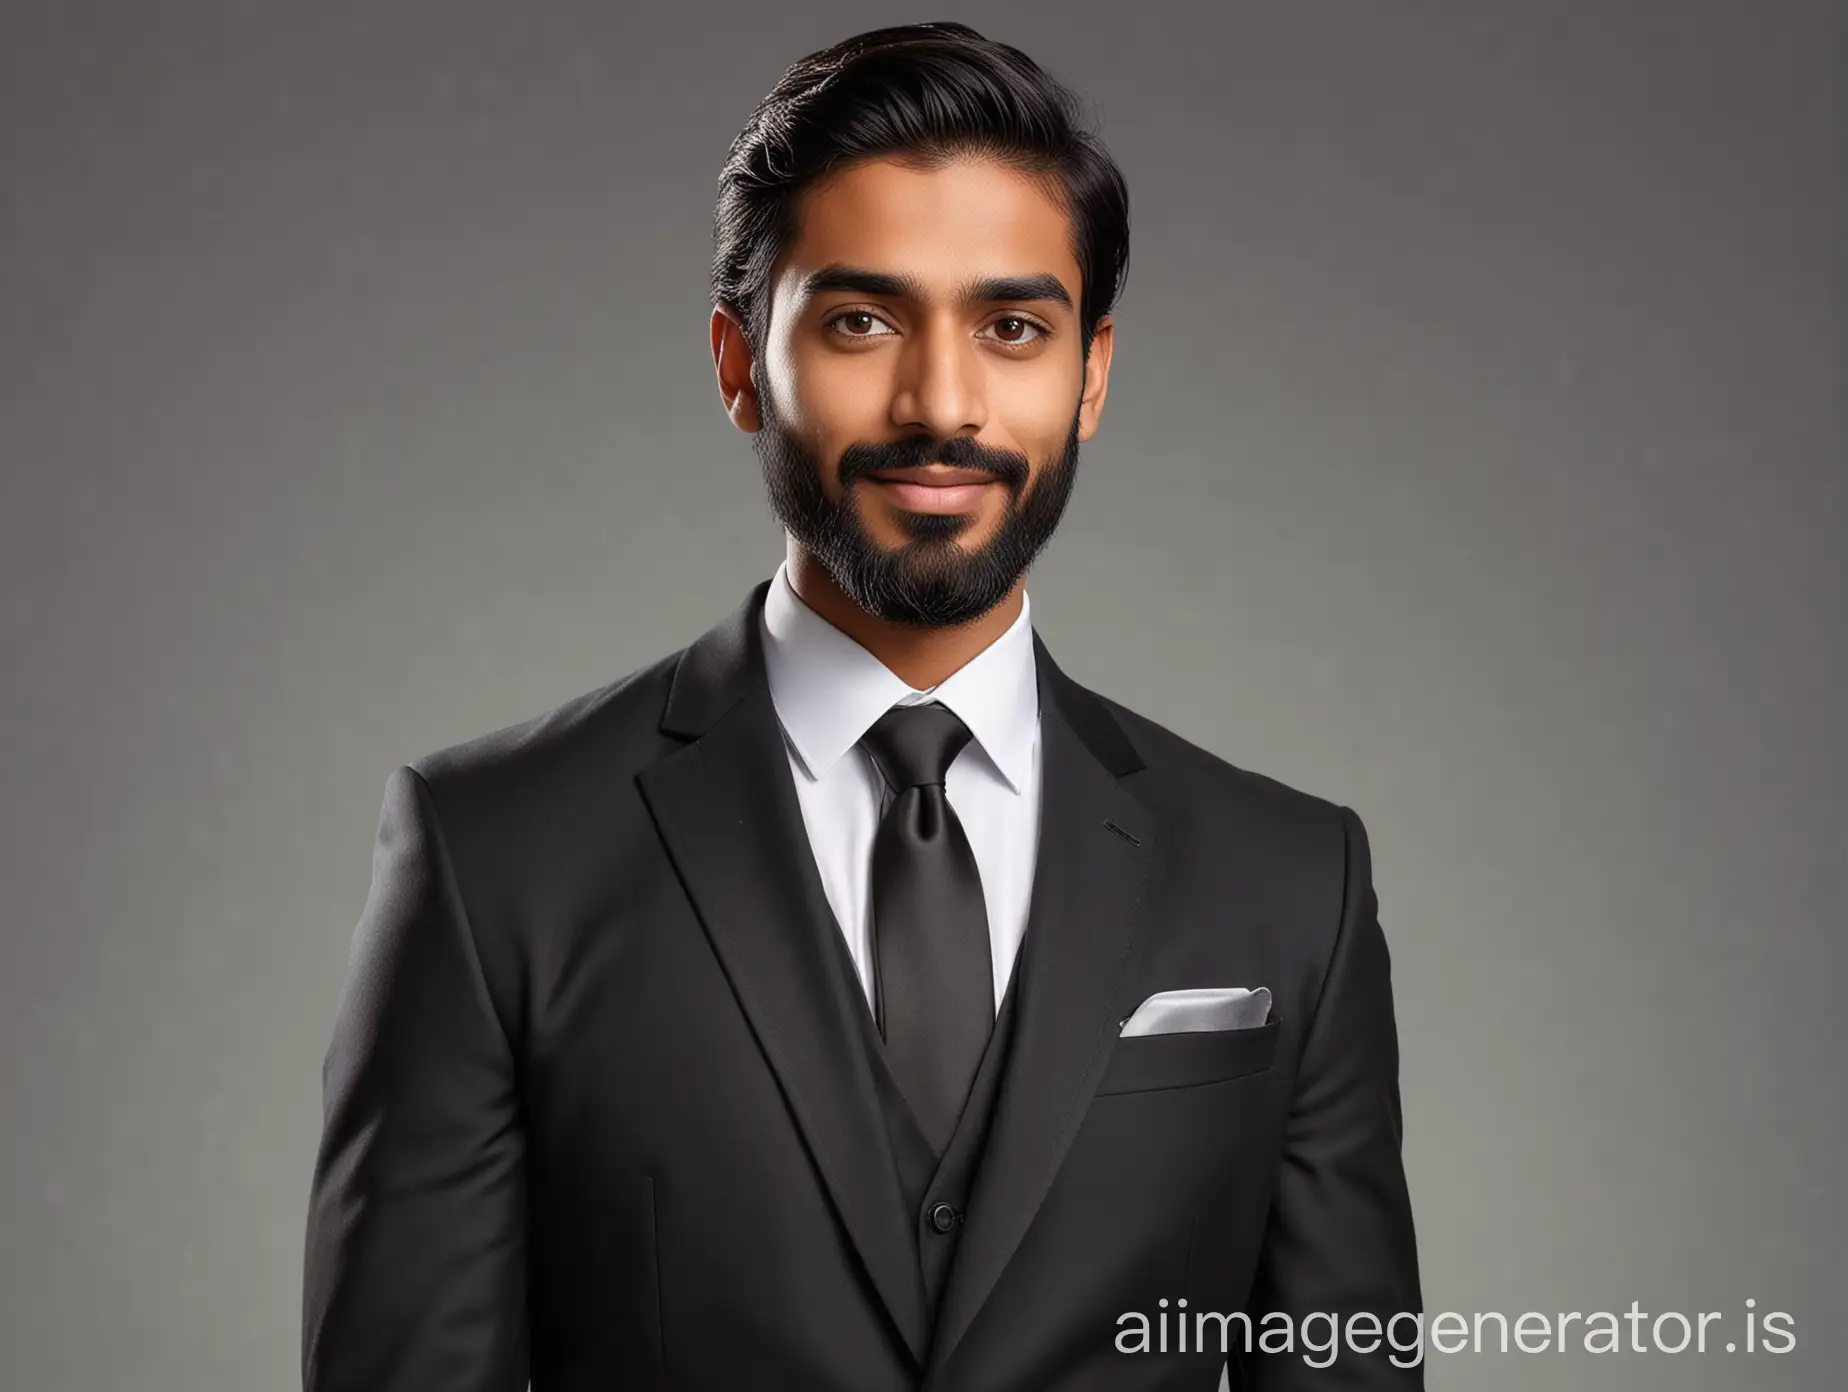 Hyper-realistic LinkedIn portrait of an Indian male in a well-fitted tuxedo, without a tie. The subject is looking directly at the camera against a plain background. He has medium-length hair, light eyebrows, small eyes, a well-groomed beard, black hair, medium-sized ears, and a brownish skin tone.